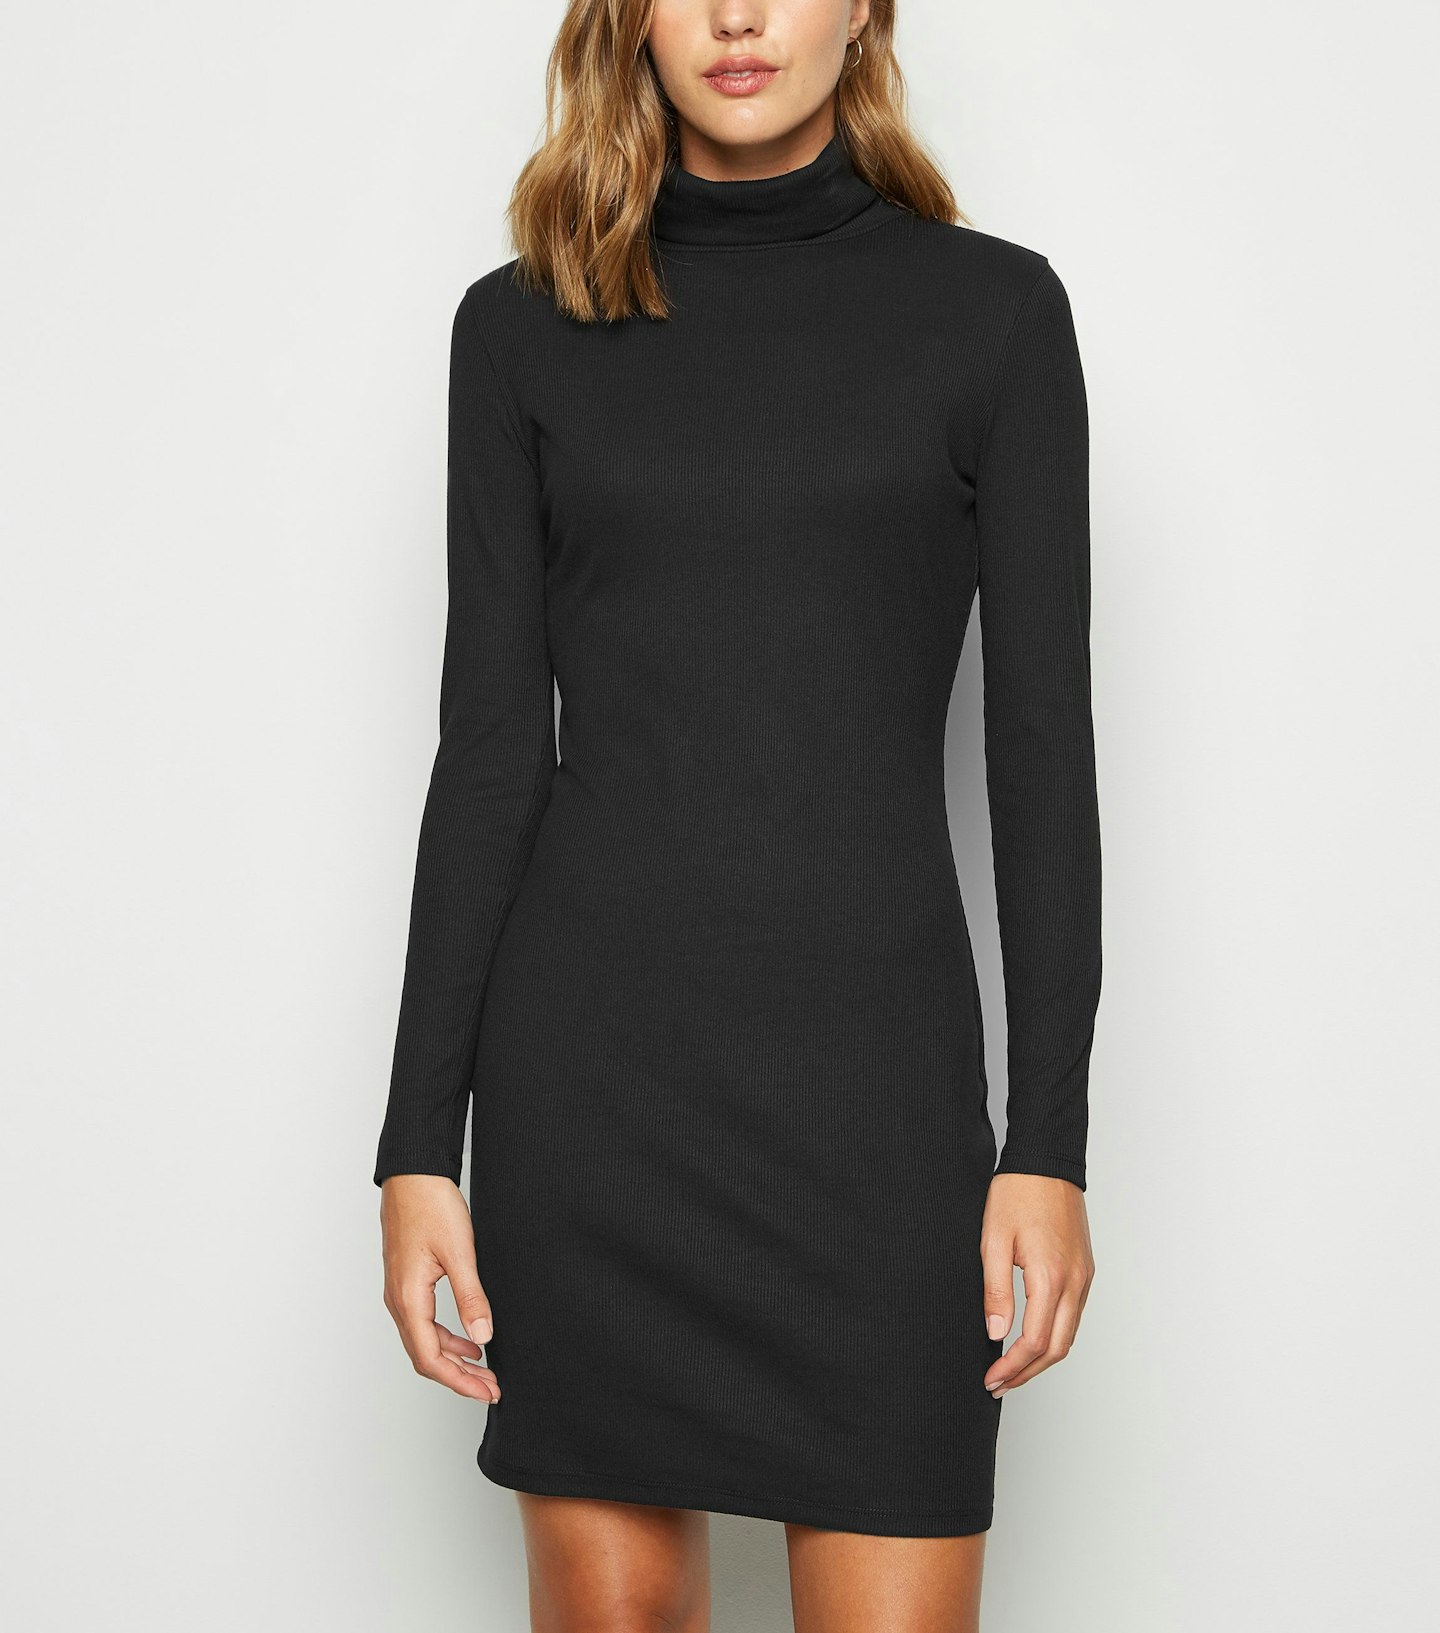 New Look Black Ribbed Roll Neck Bodycon Dress